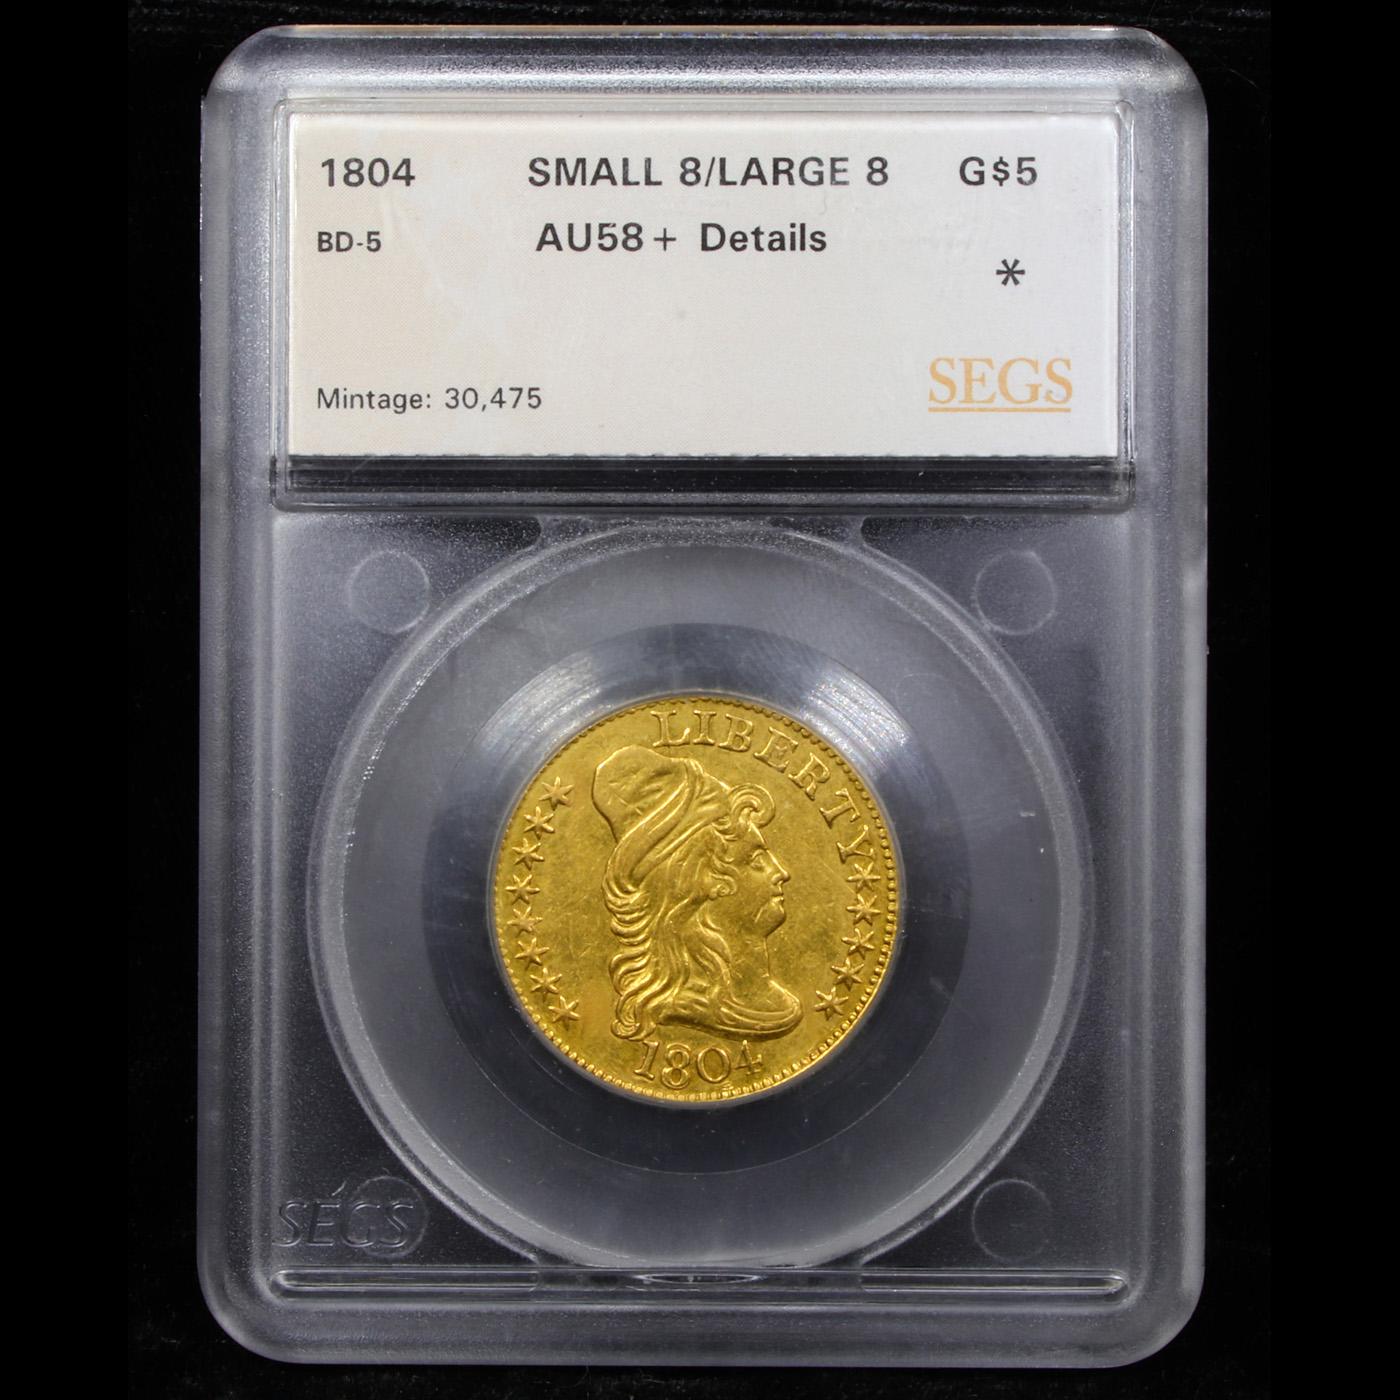 *HIGHLIGHT OF THE MONTH* 1804 Small/Large 8 BD-5 R-7 Gold Draped Bust $5  au58+ details By SEGS (fc)